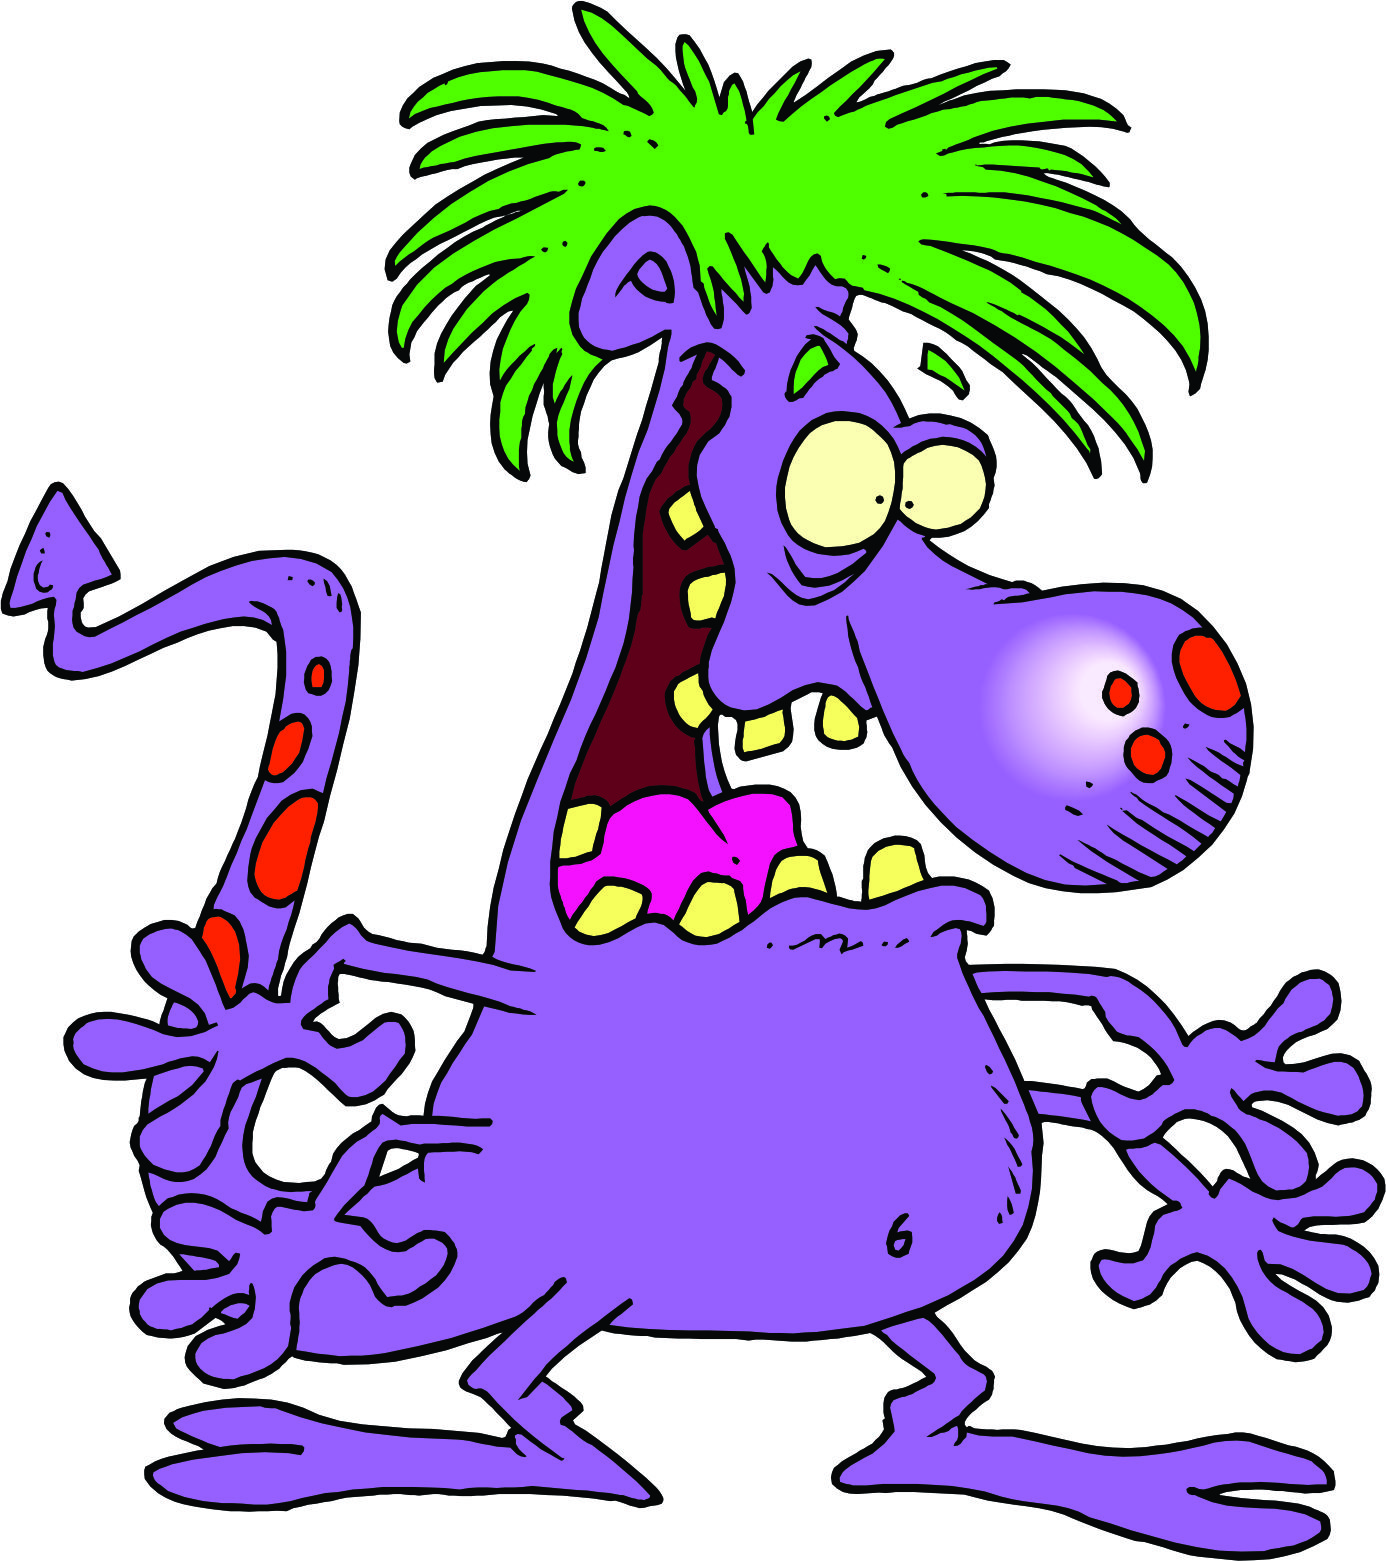 Scary Cartoon Monster Images  Pictures - Becuo